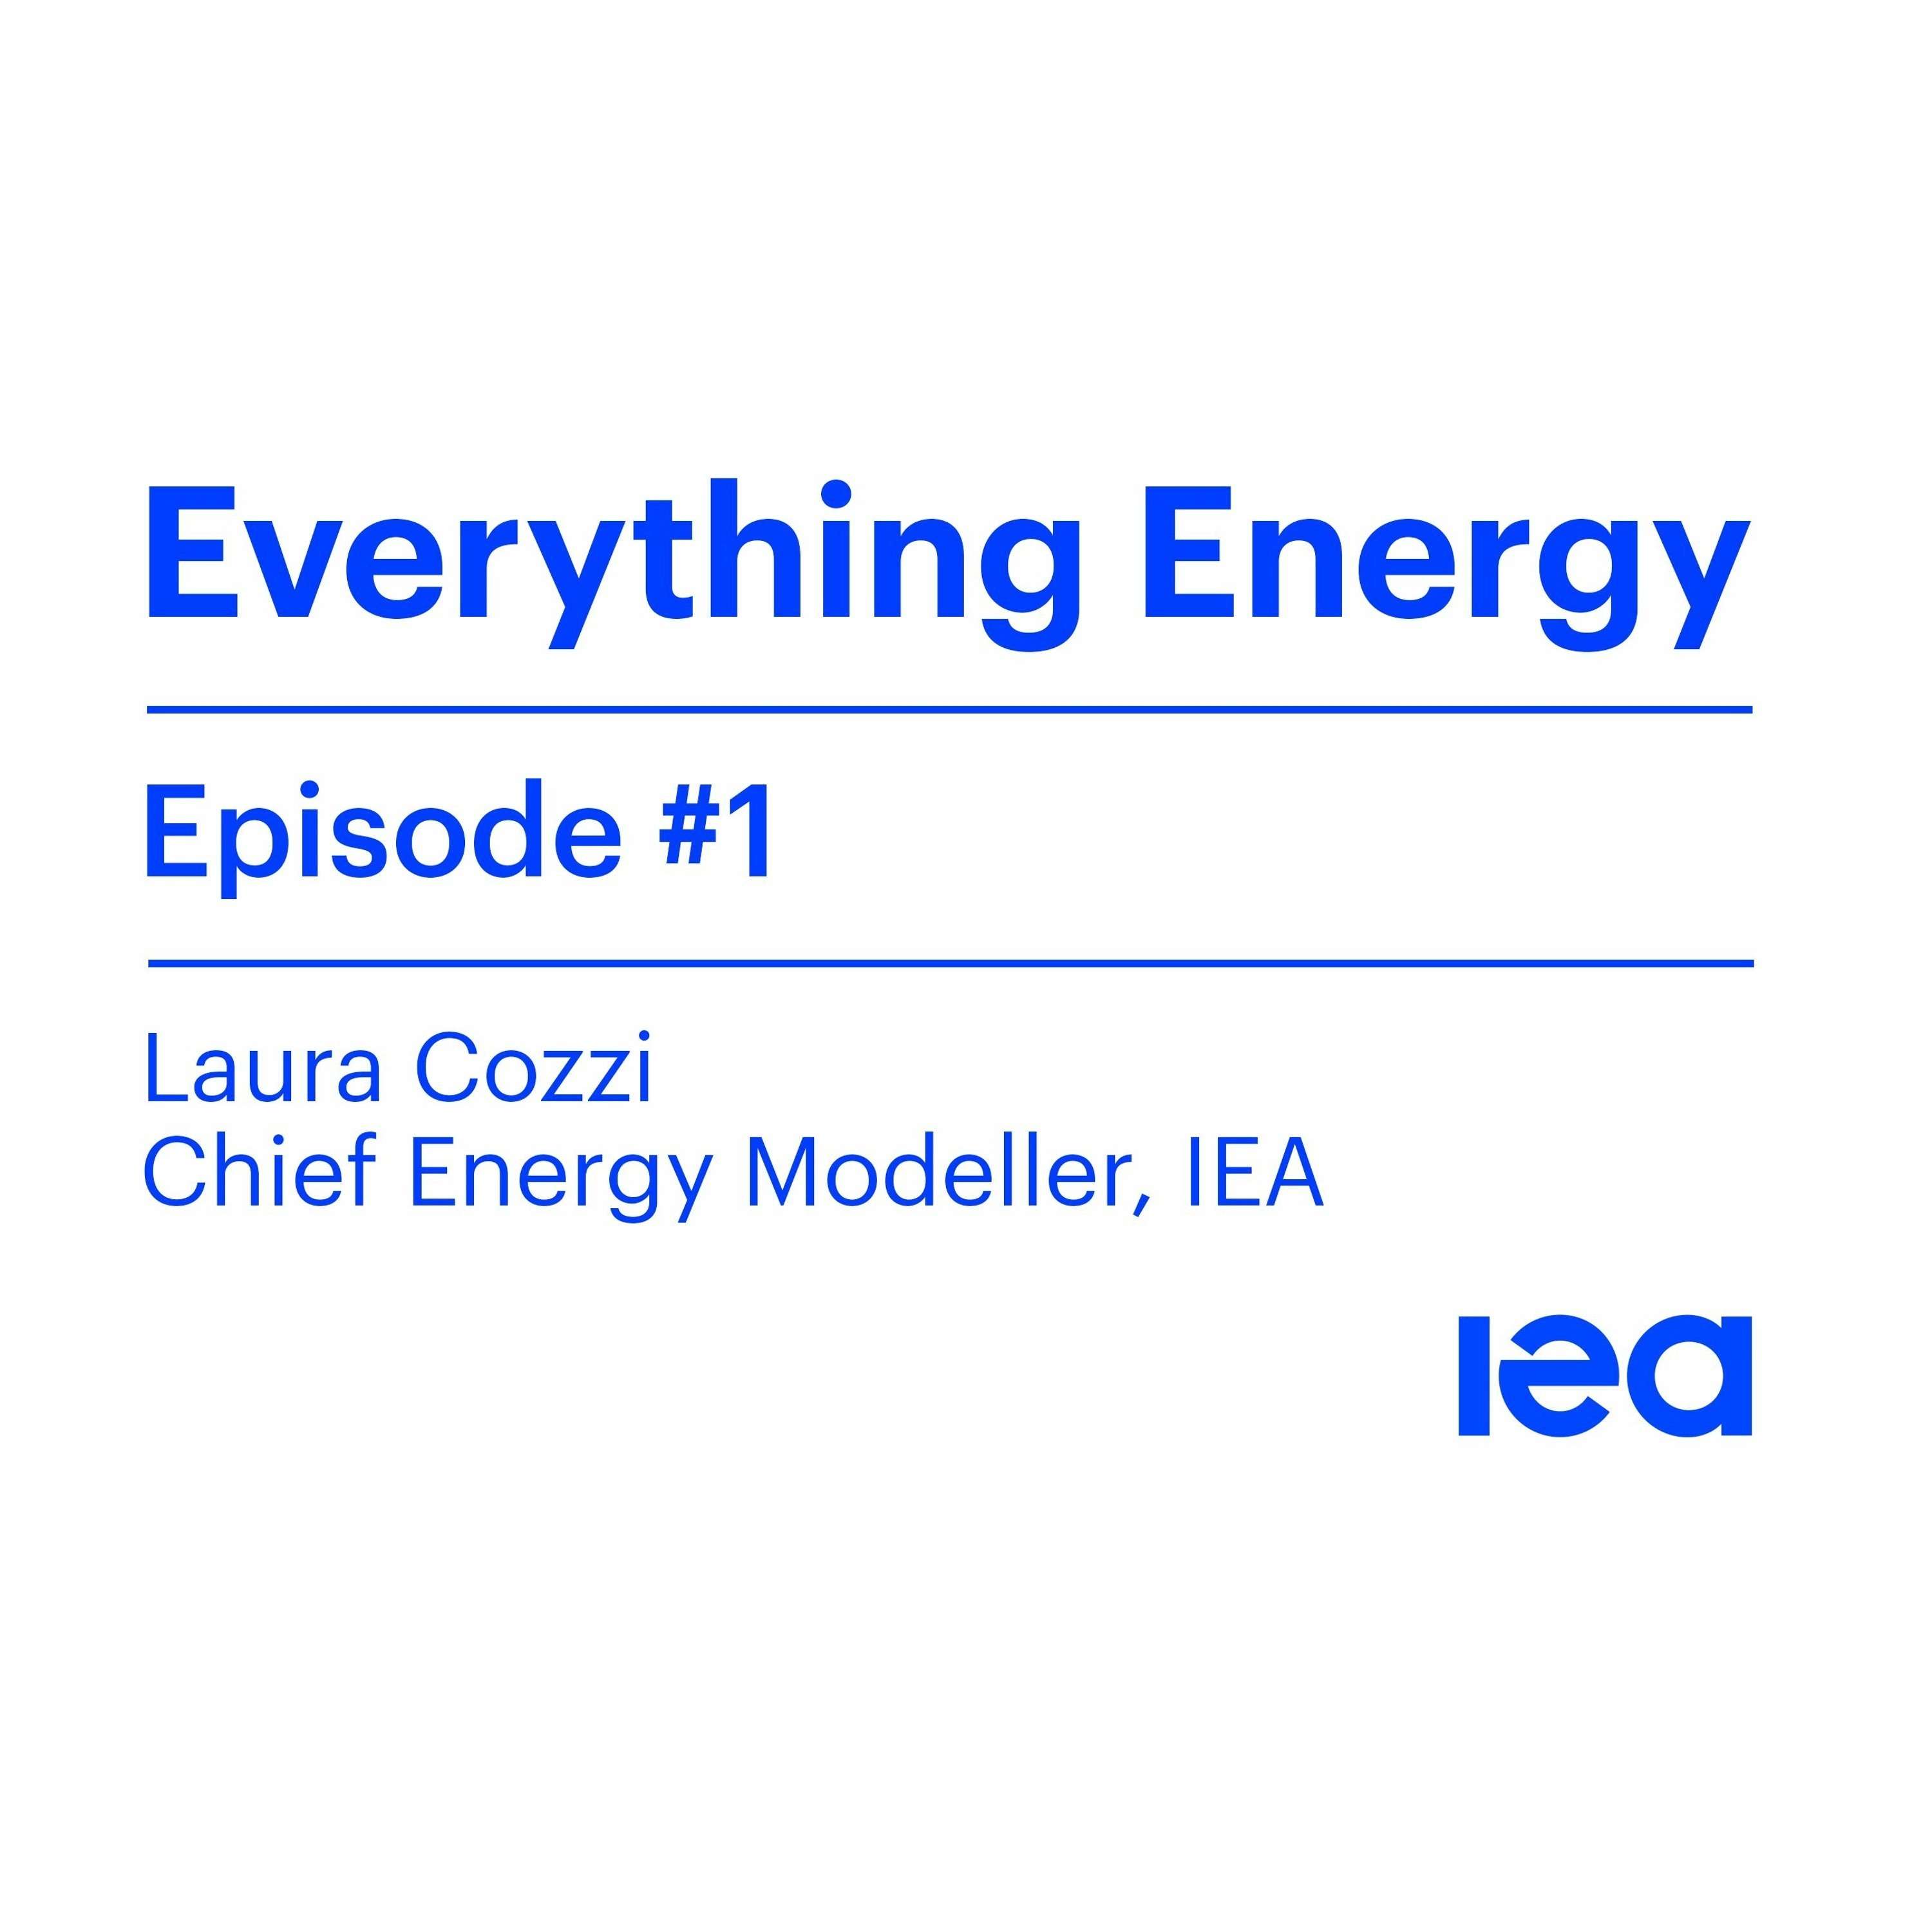 Episode 1: How is the Covid-19 pandemic affecting the global energy system & CO2 emissions?